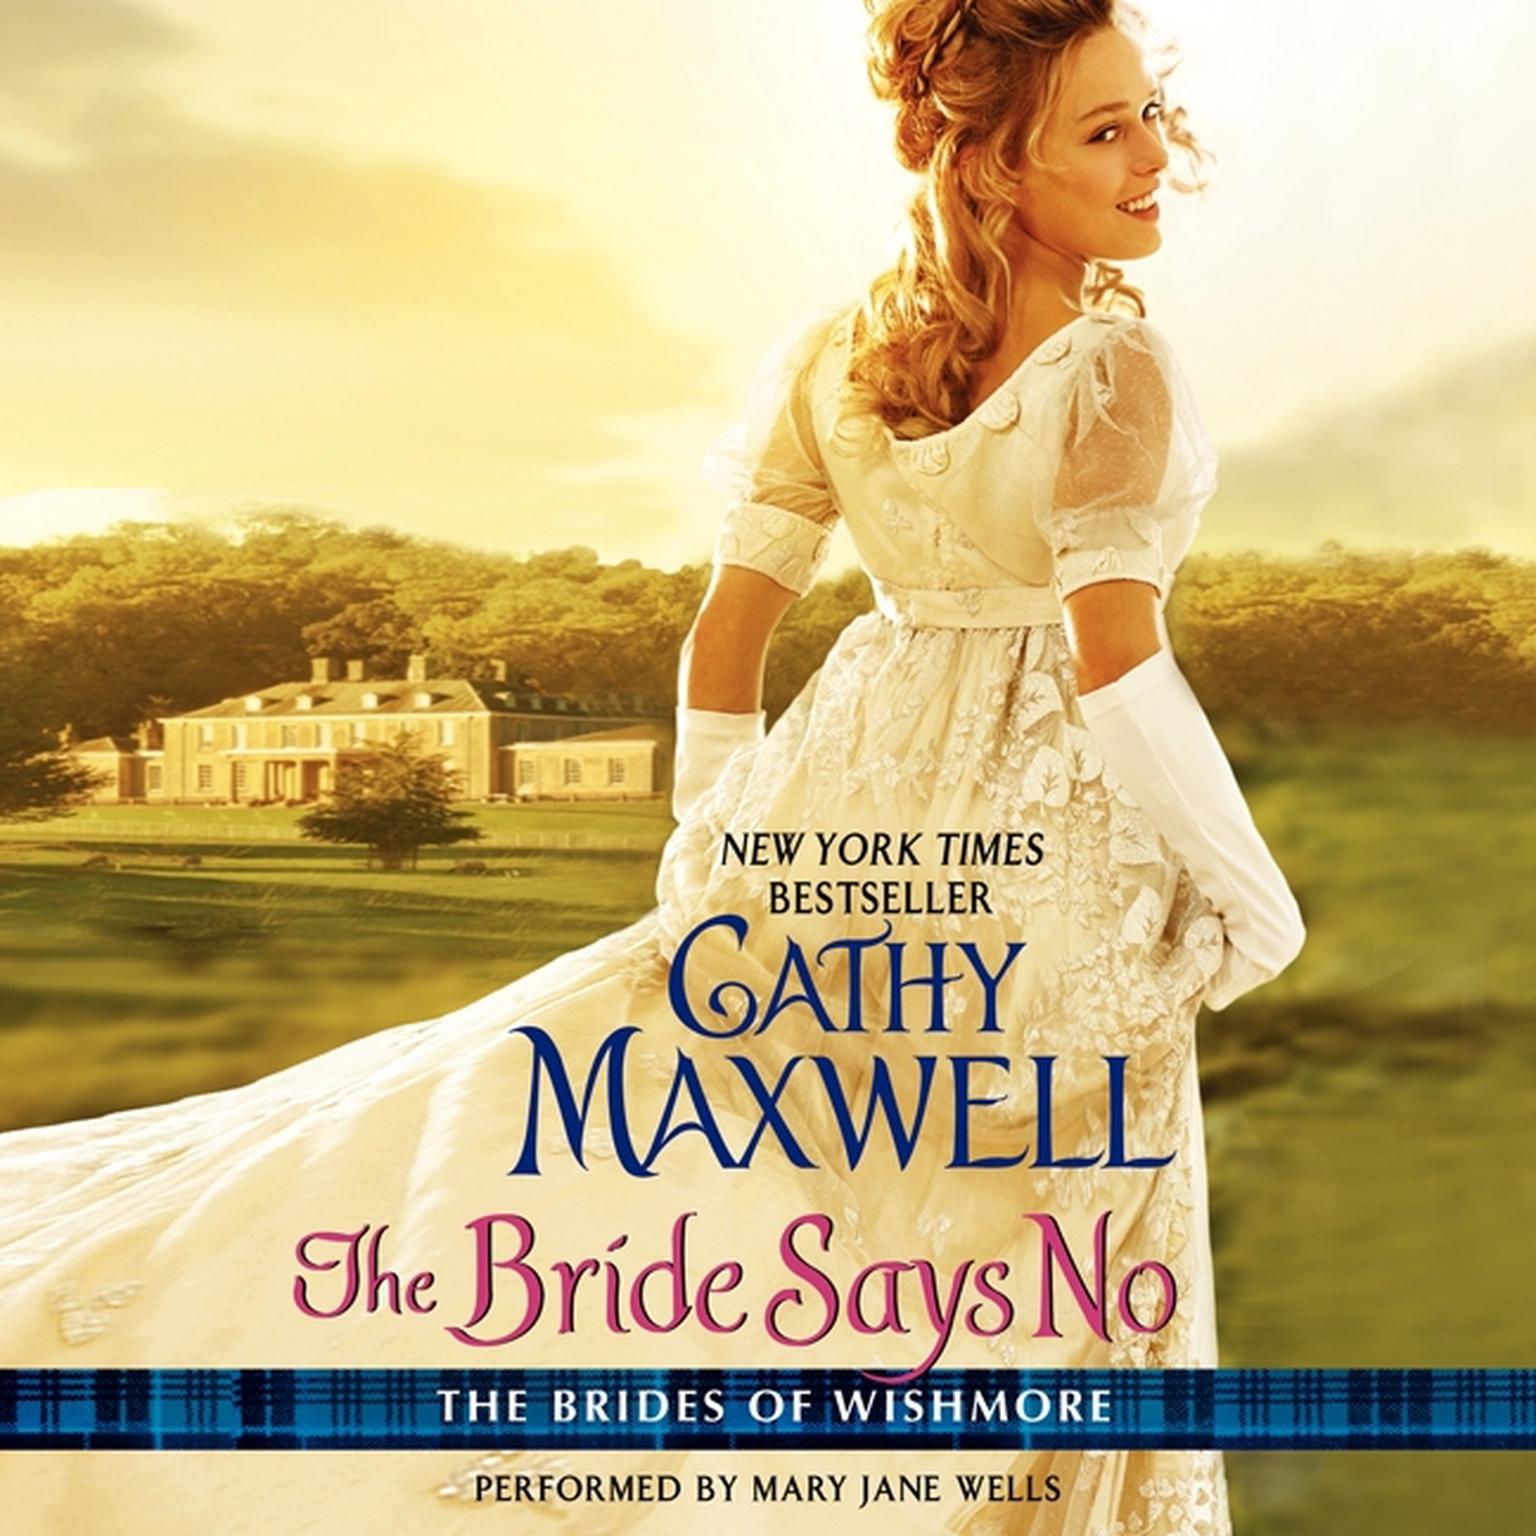 The Bride Says No: The Brides of Wishmore Audiobook, by Cathy Maxwell